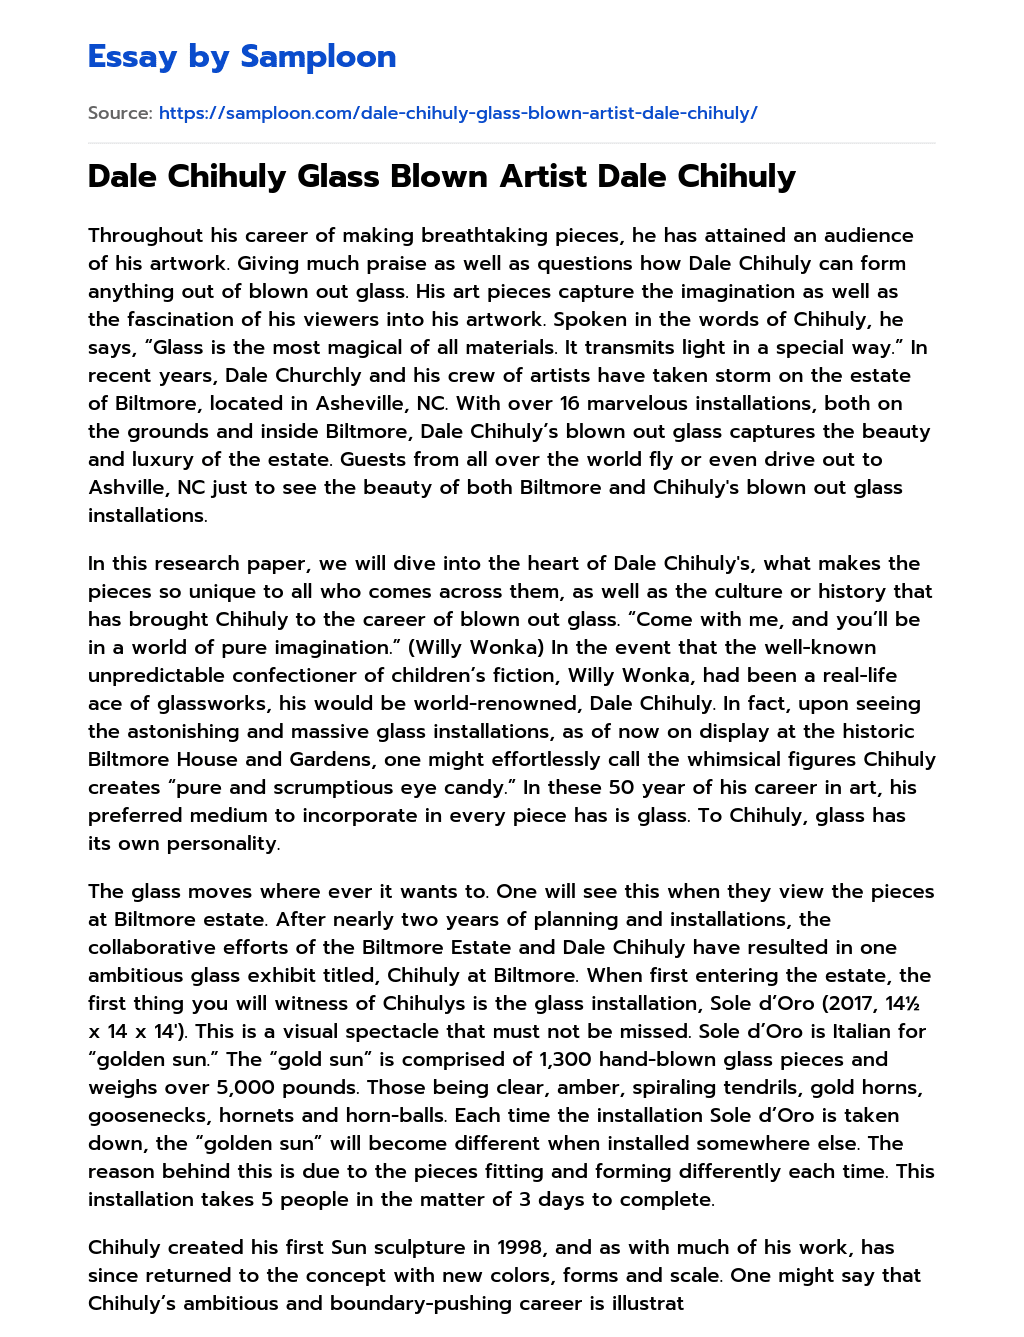 Dale Chihuly Glass Blown Artist Dale Chihuly essay